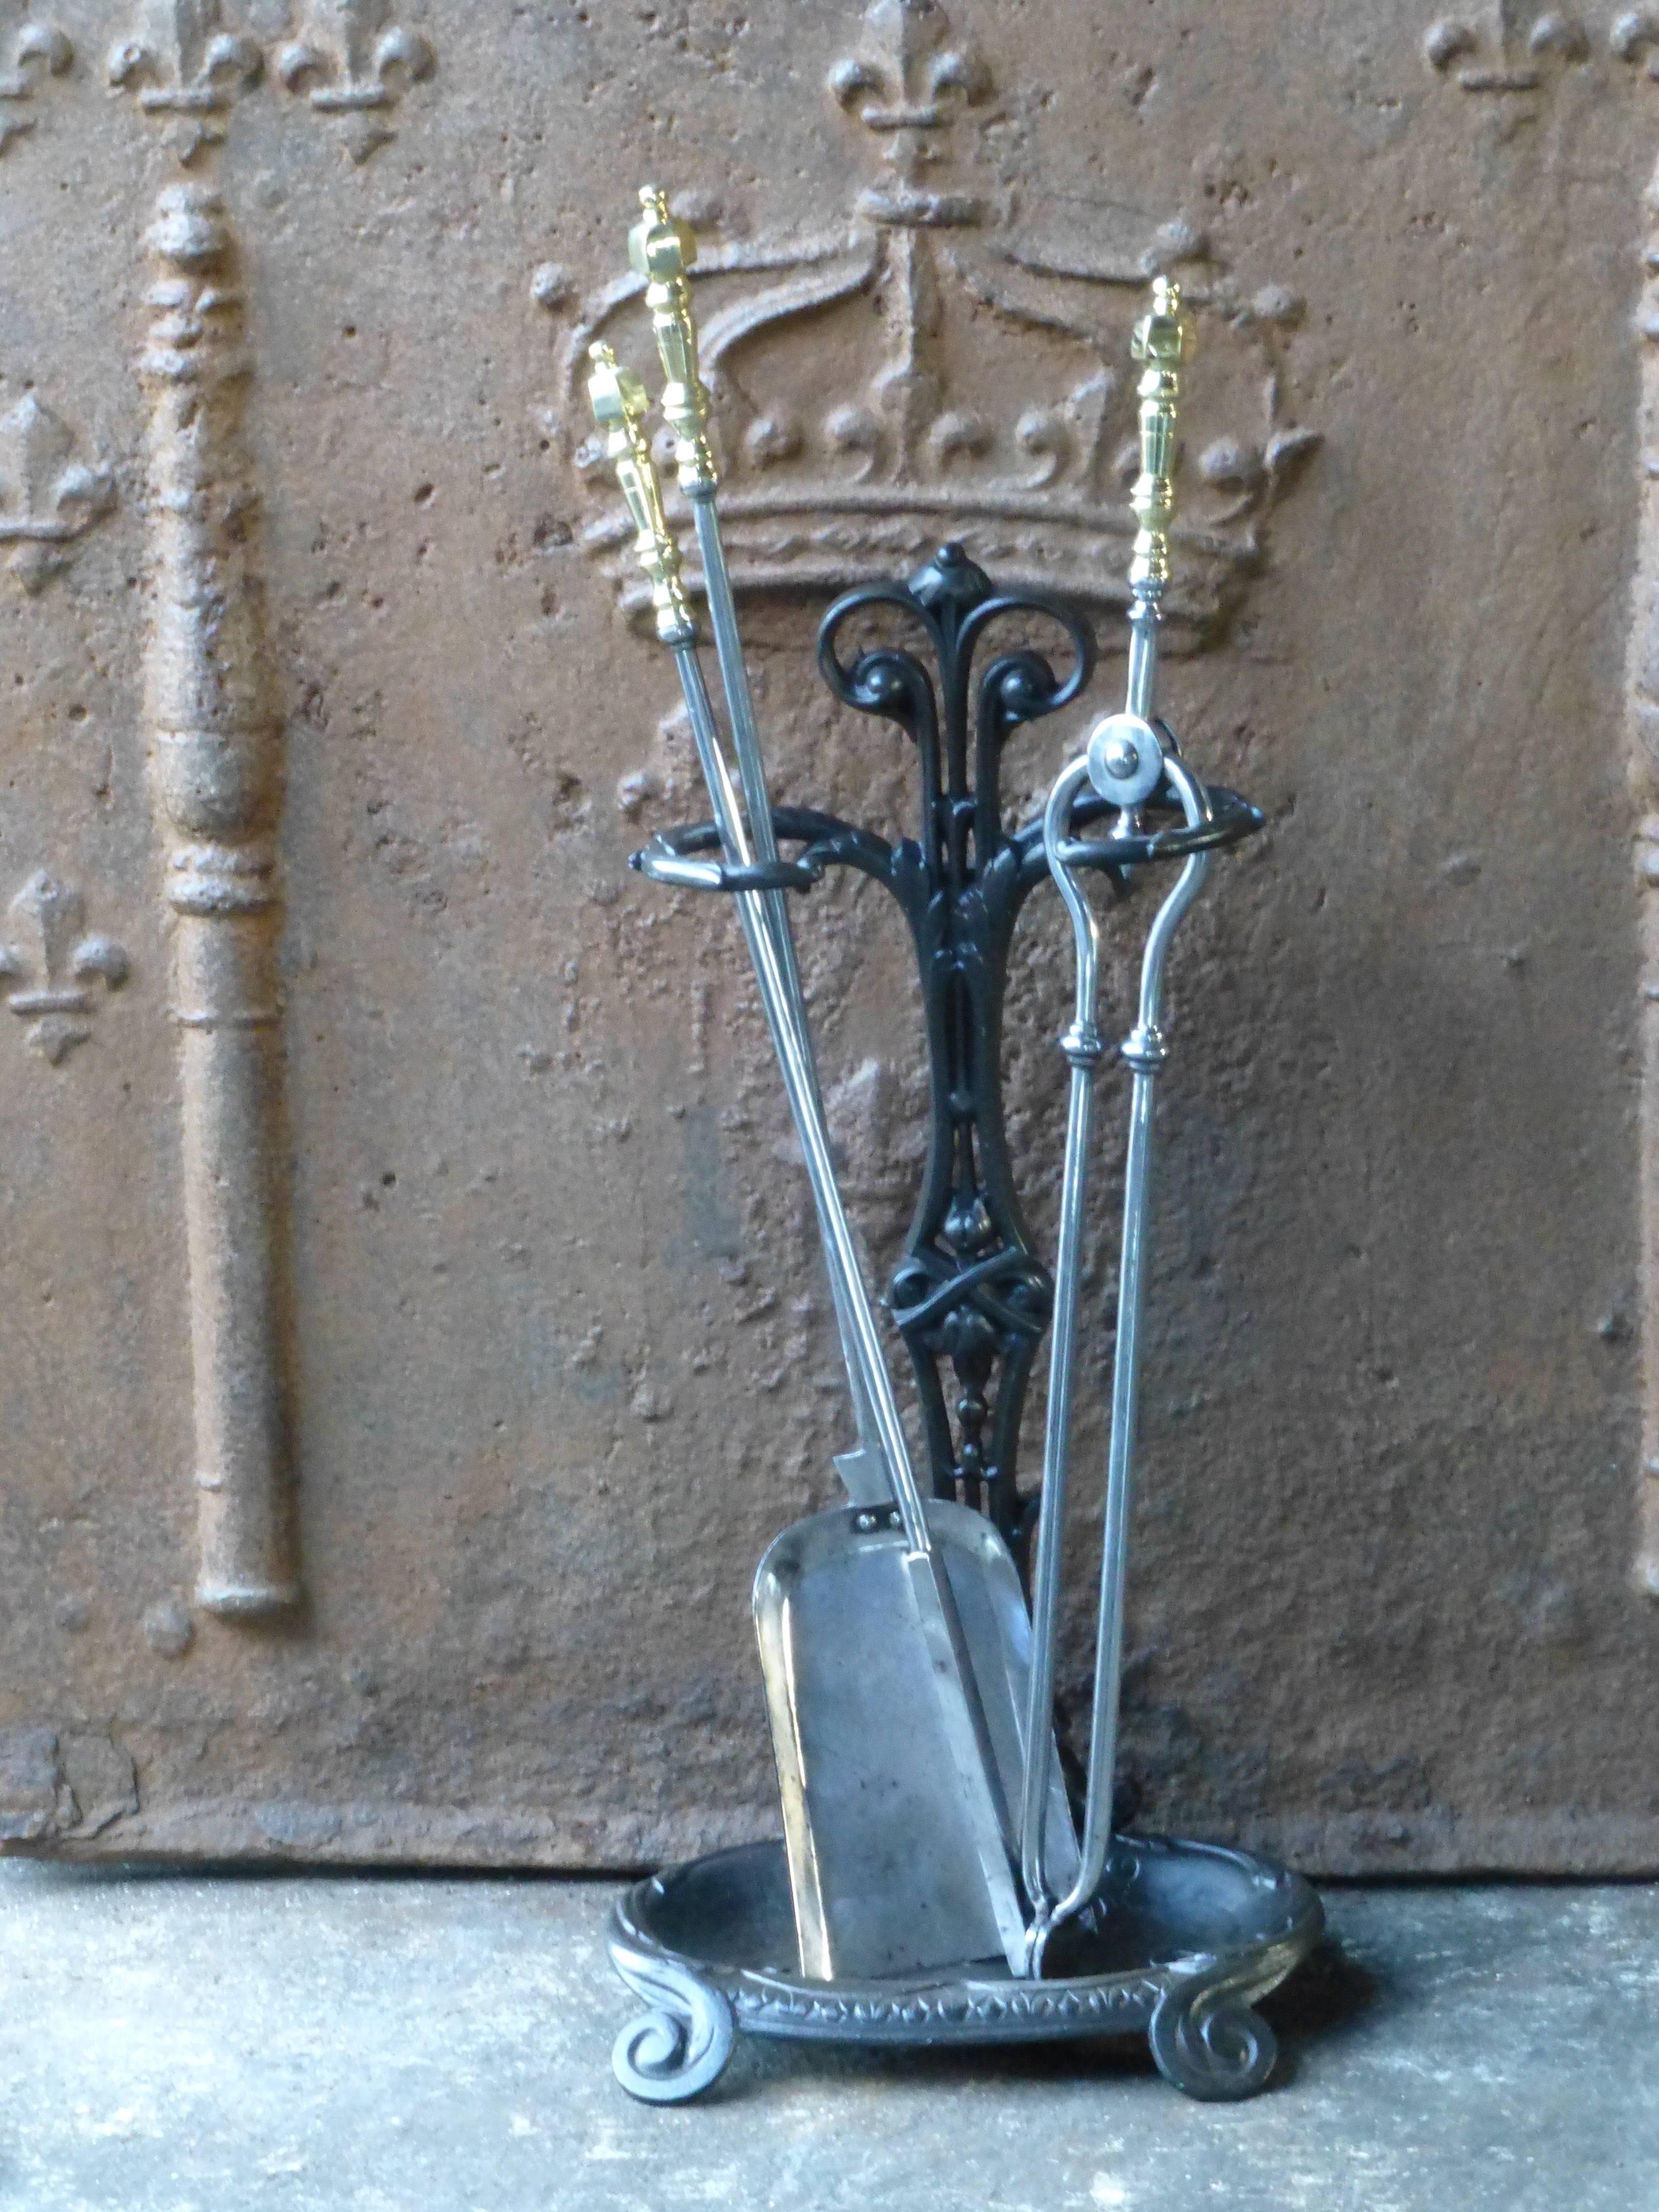 19th century English fireplace toolset made of cast iron, polished steel and polished brass.